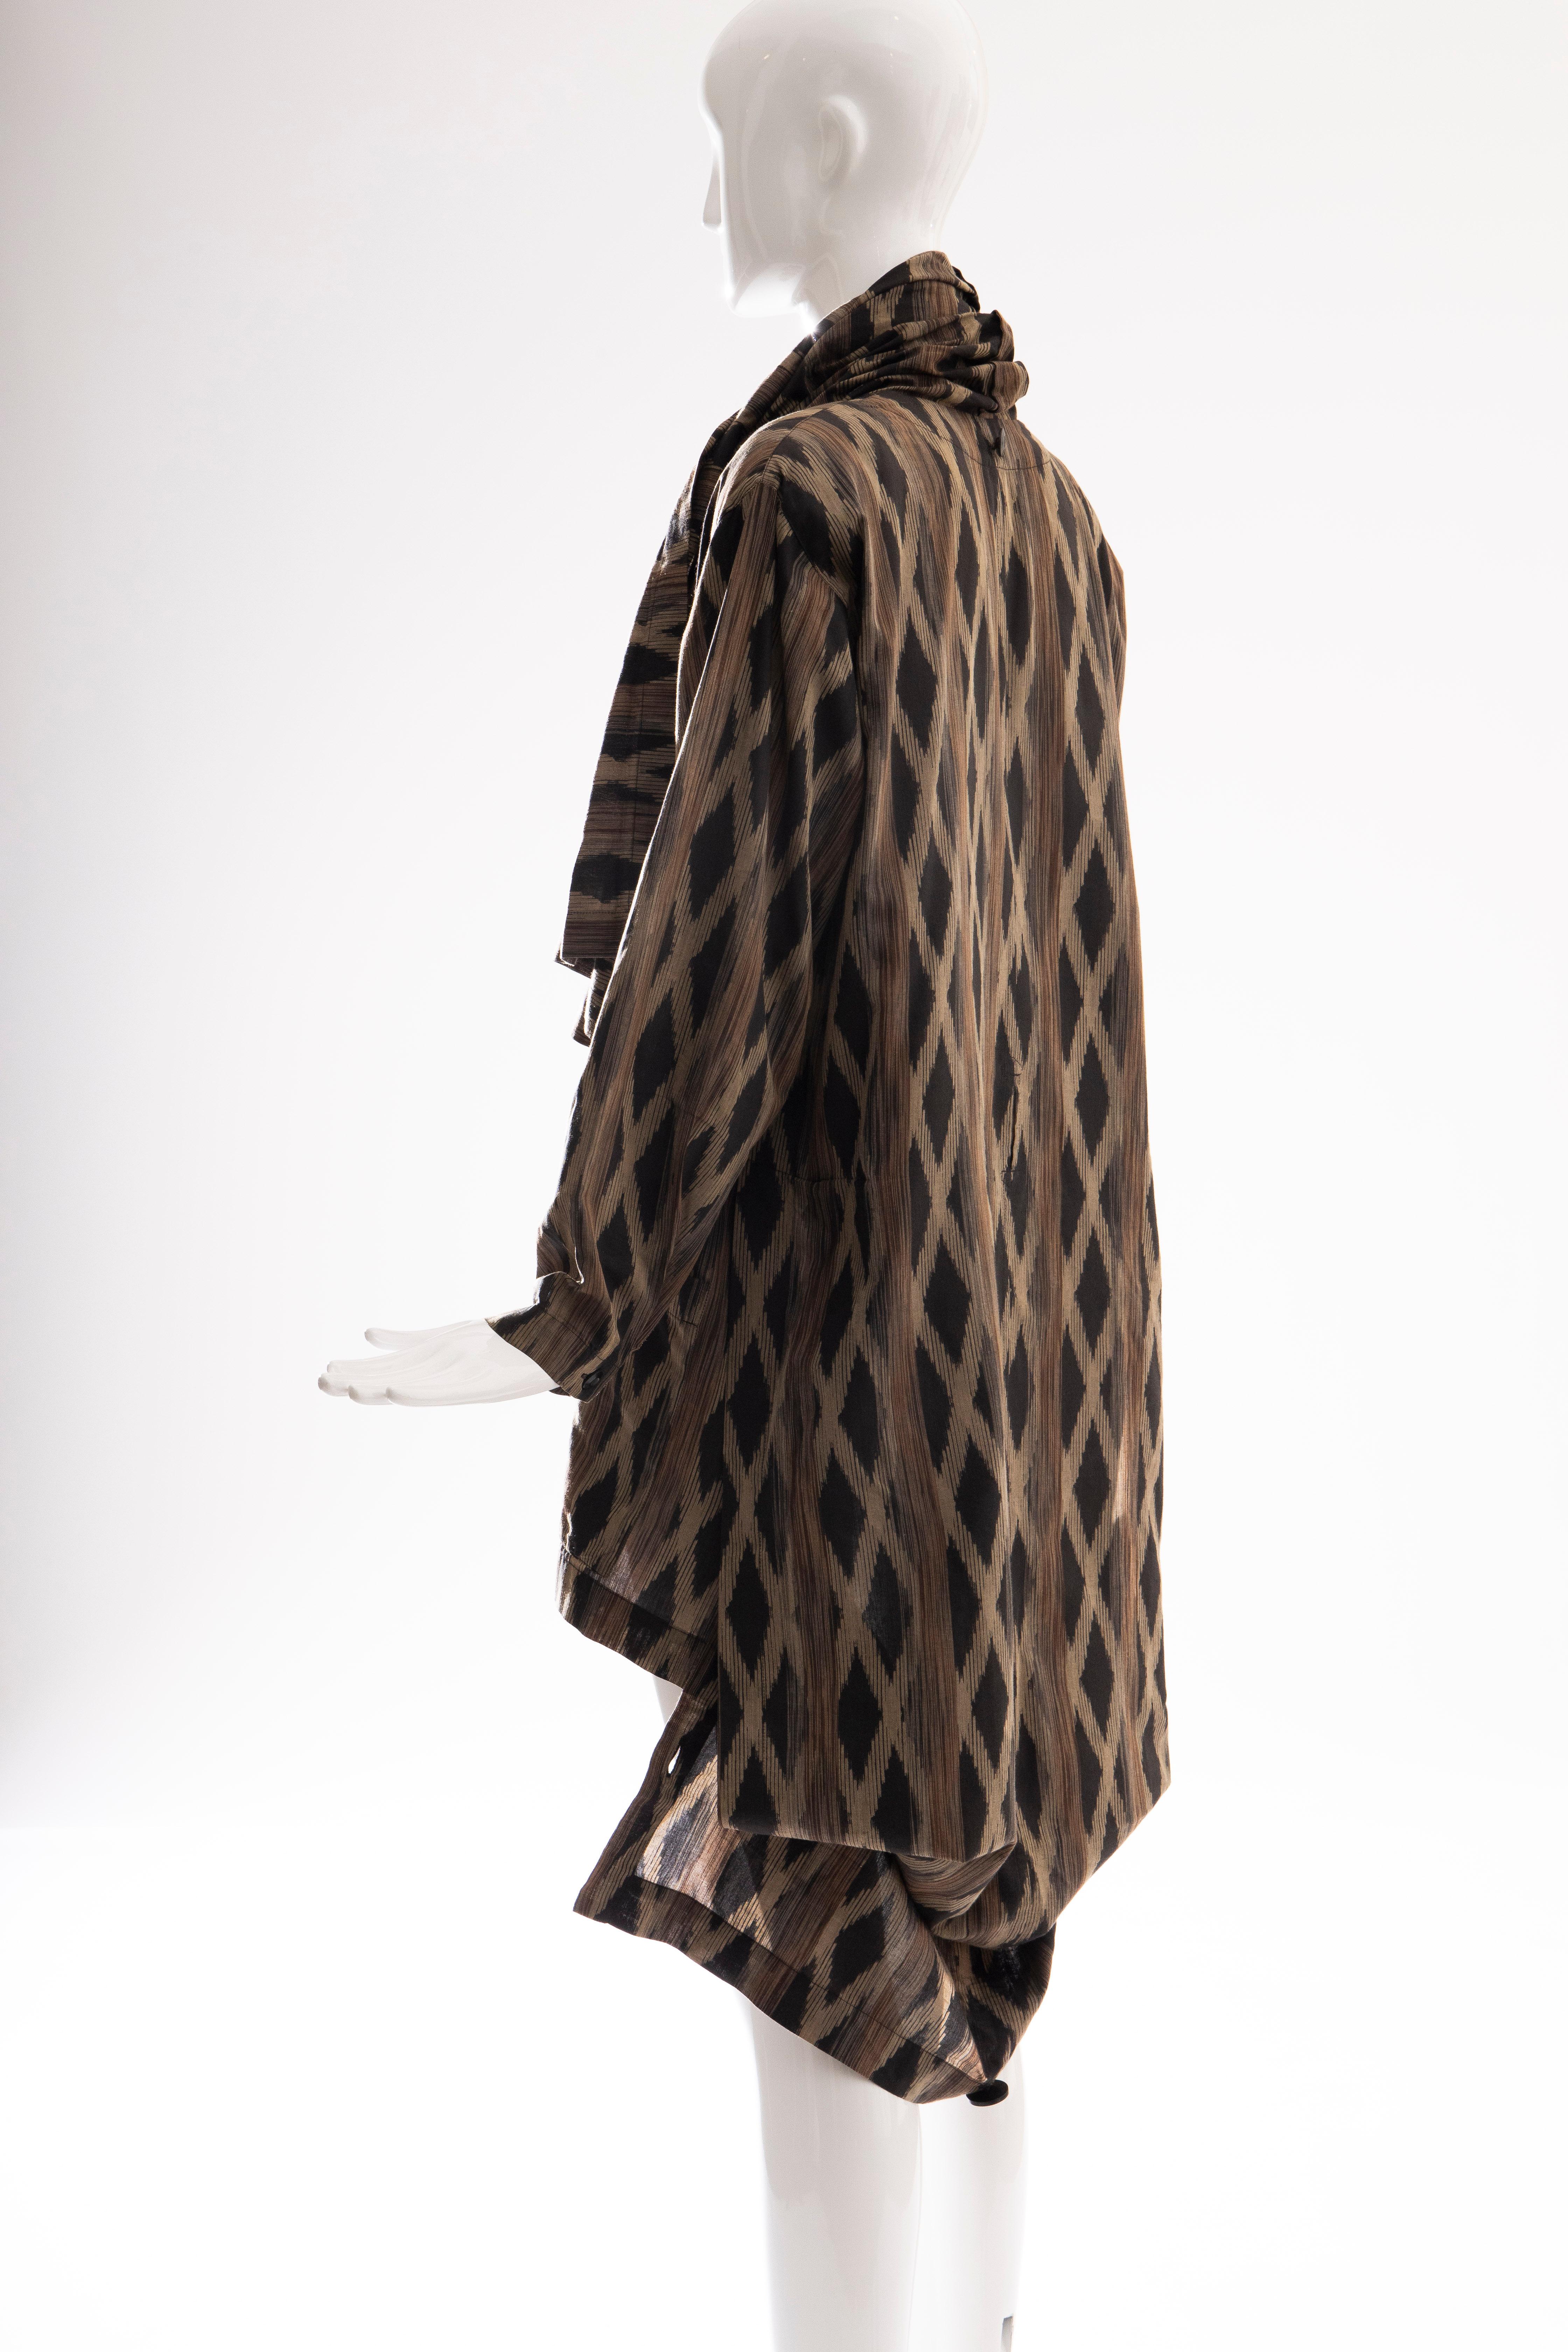 Issey Miyake Cotton Silk Lattice Weave Jacket Duster Cardigan, Fall 1986 For Sale 9